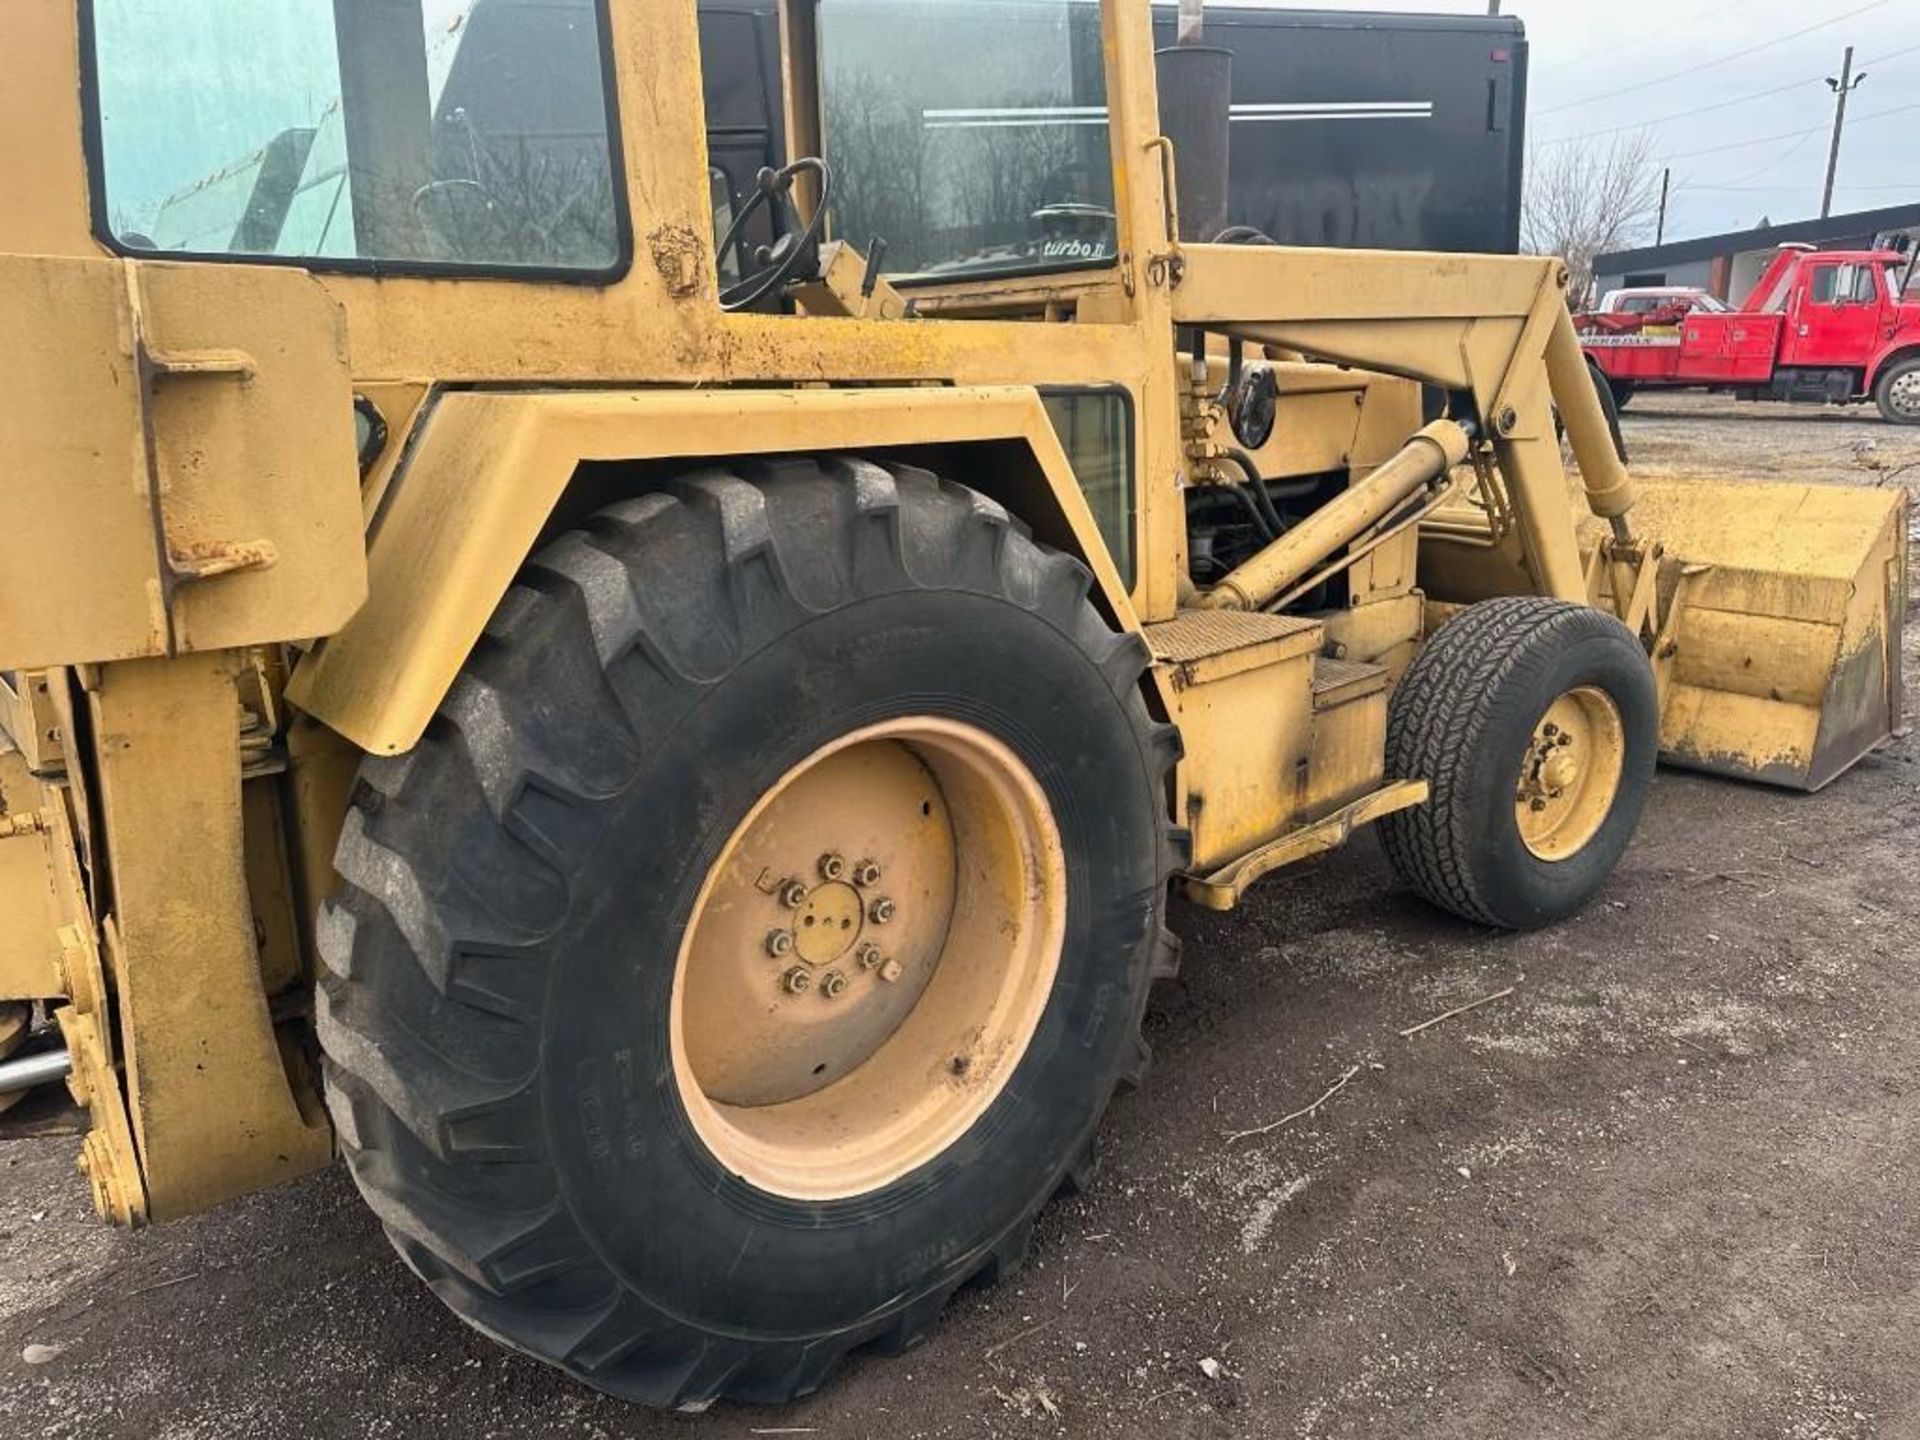 Ford 750 backhoe (located off-site, please read description) - Image 7 of 12